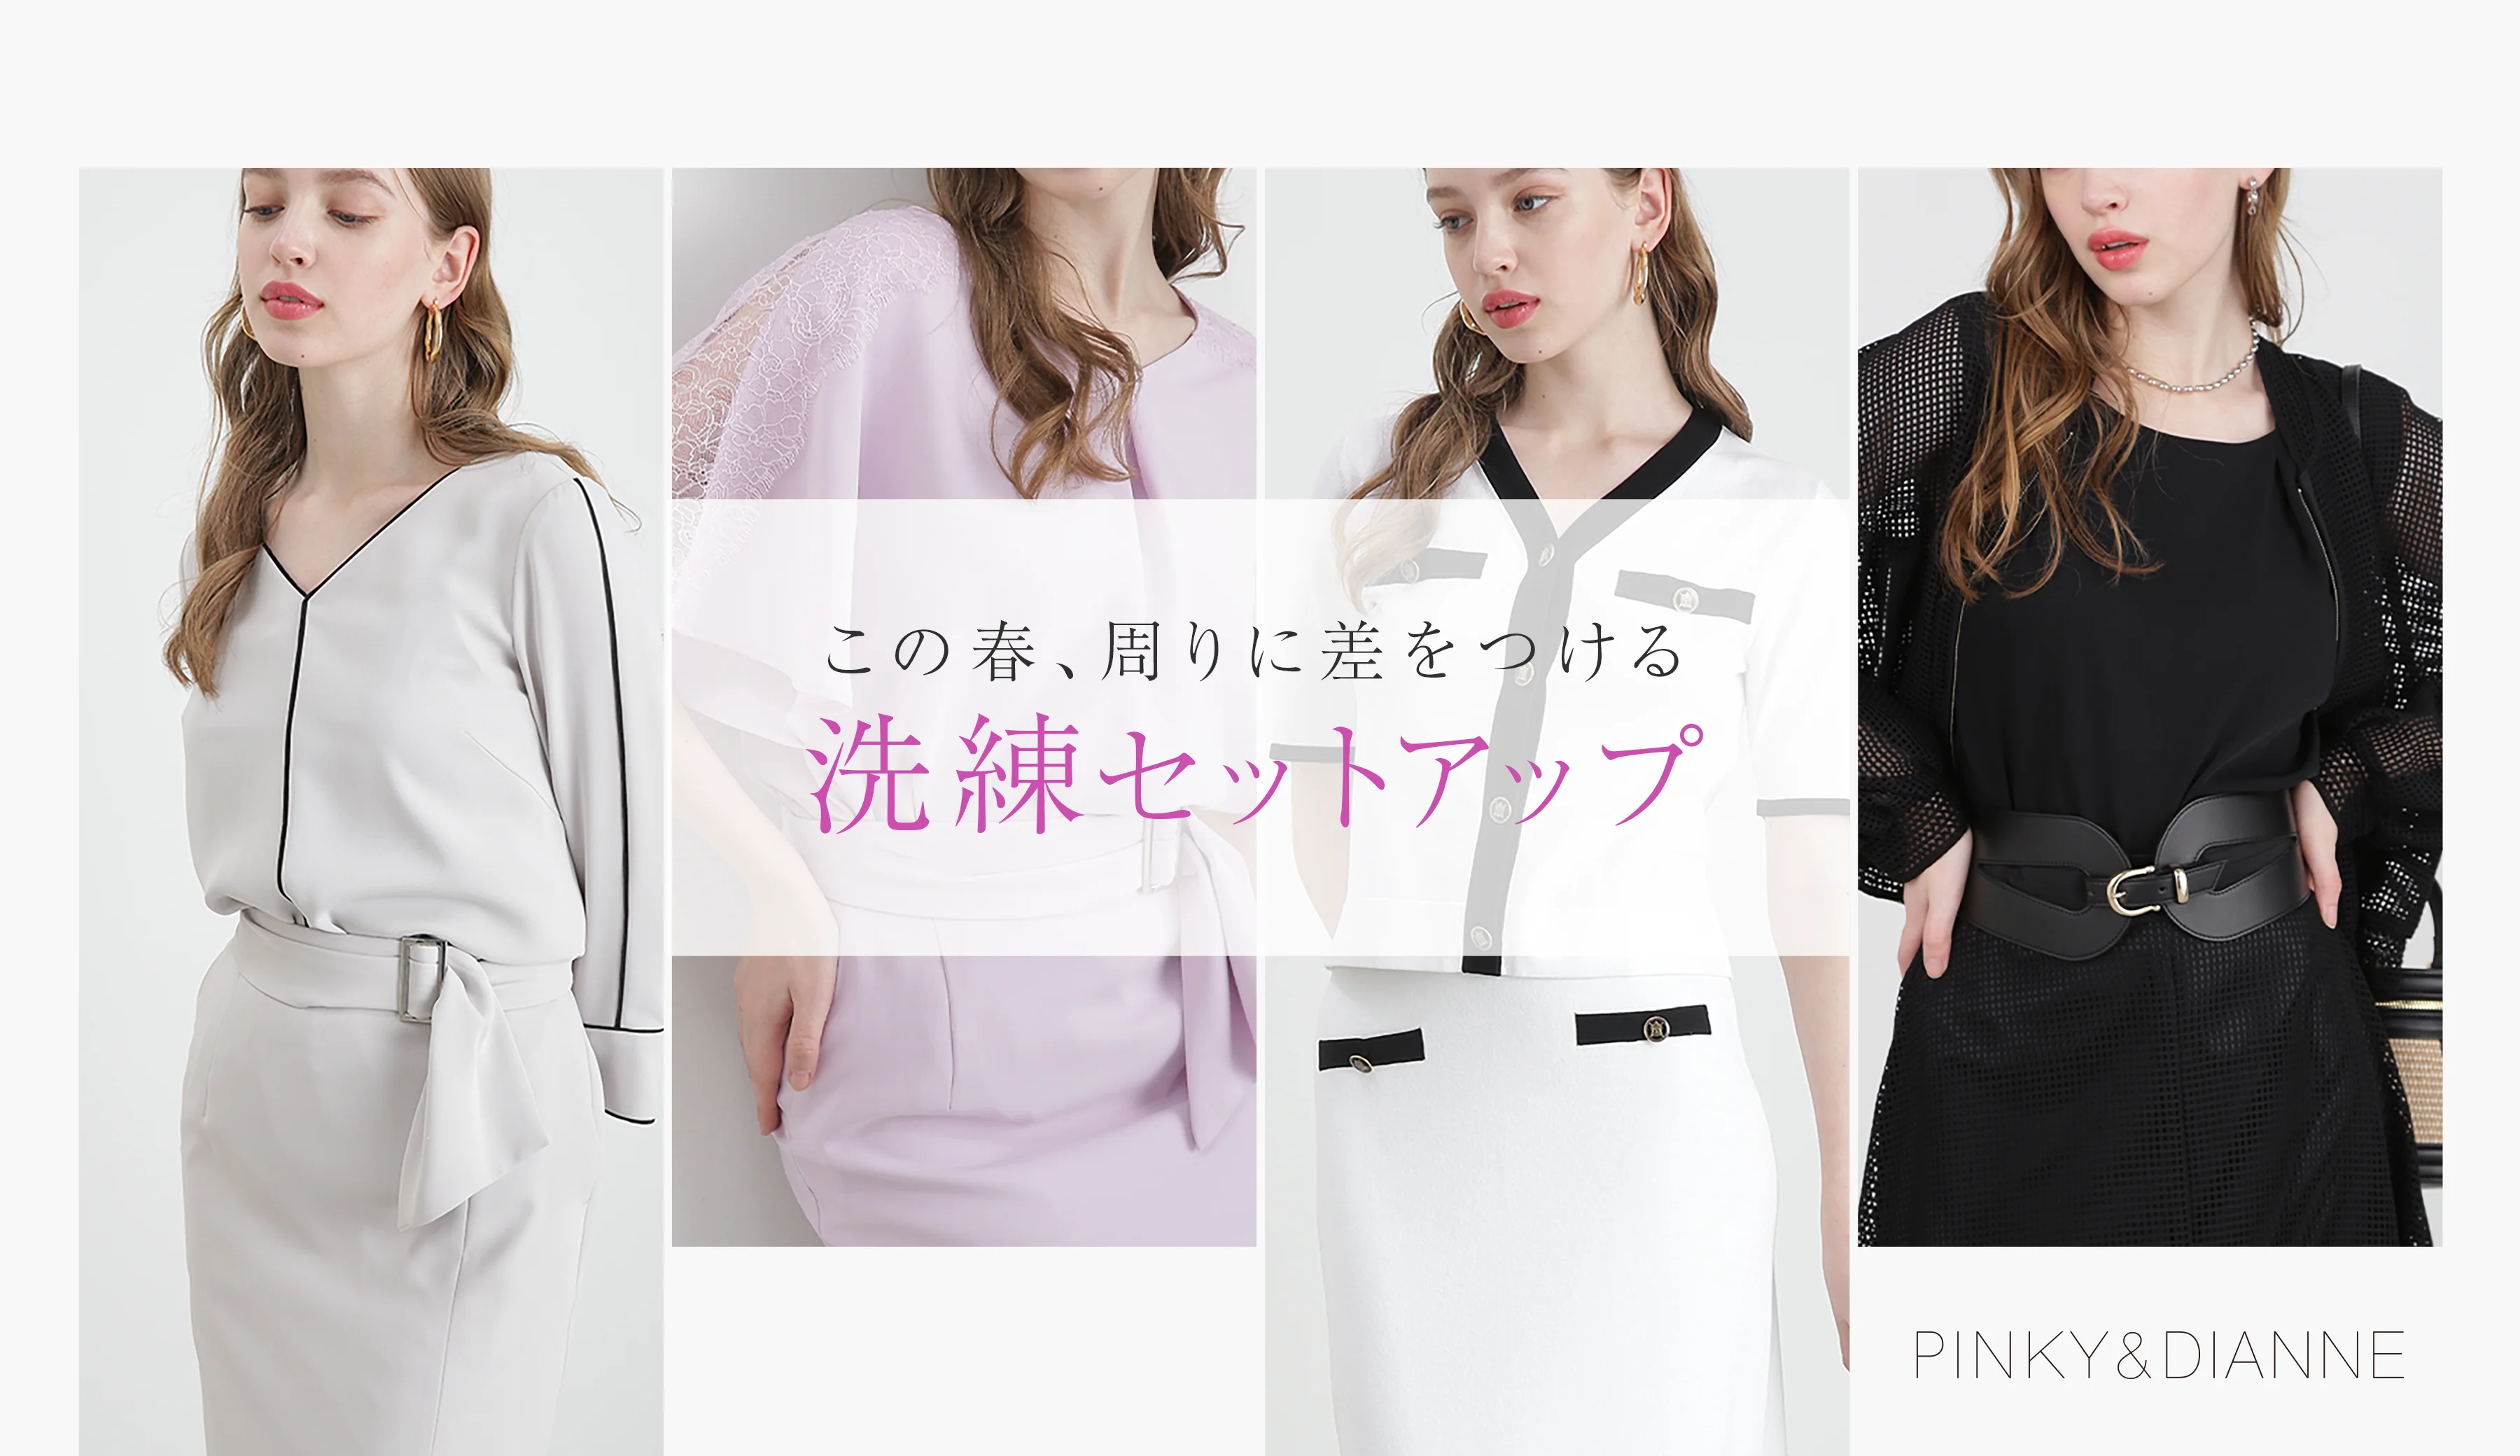 PINKY & DIANNE（ピンキーアンドダイアン）の公式通販サイト。PINKY ...